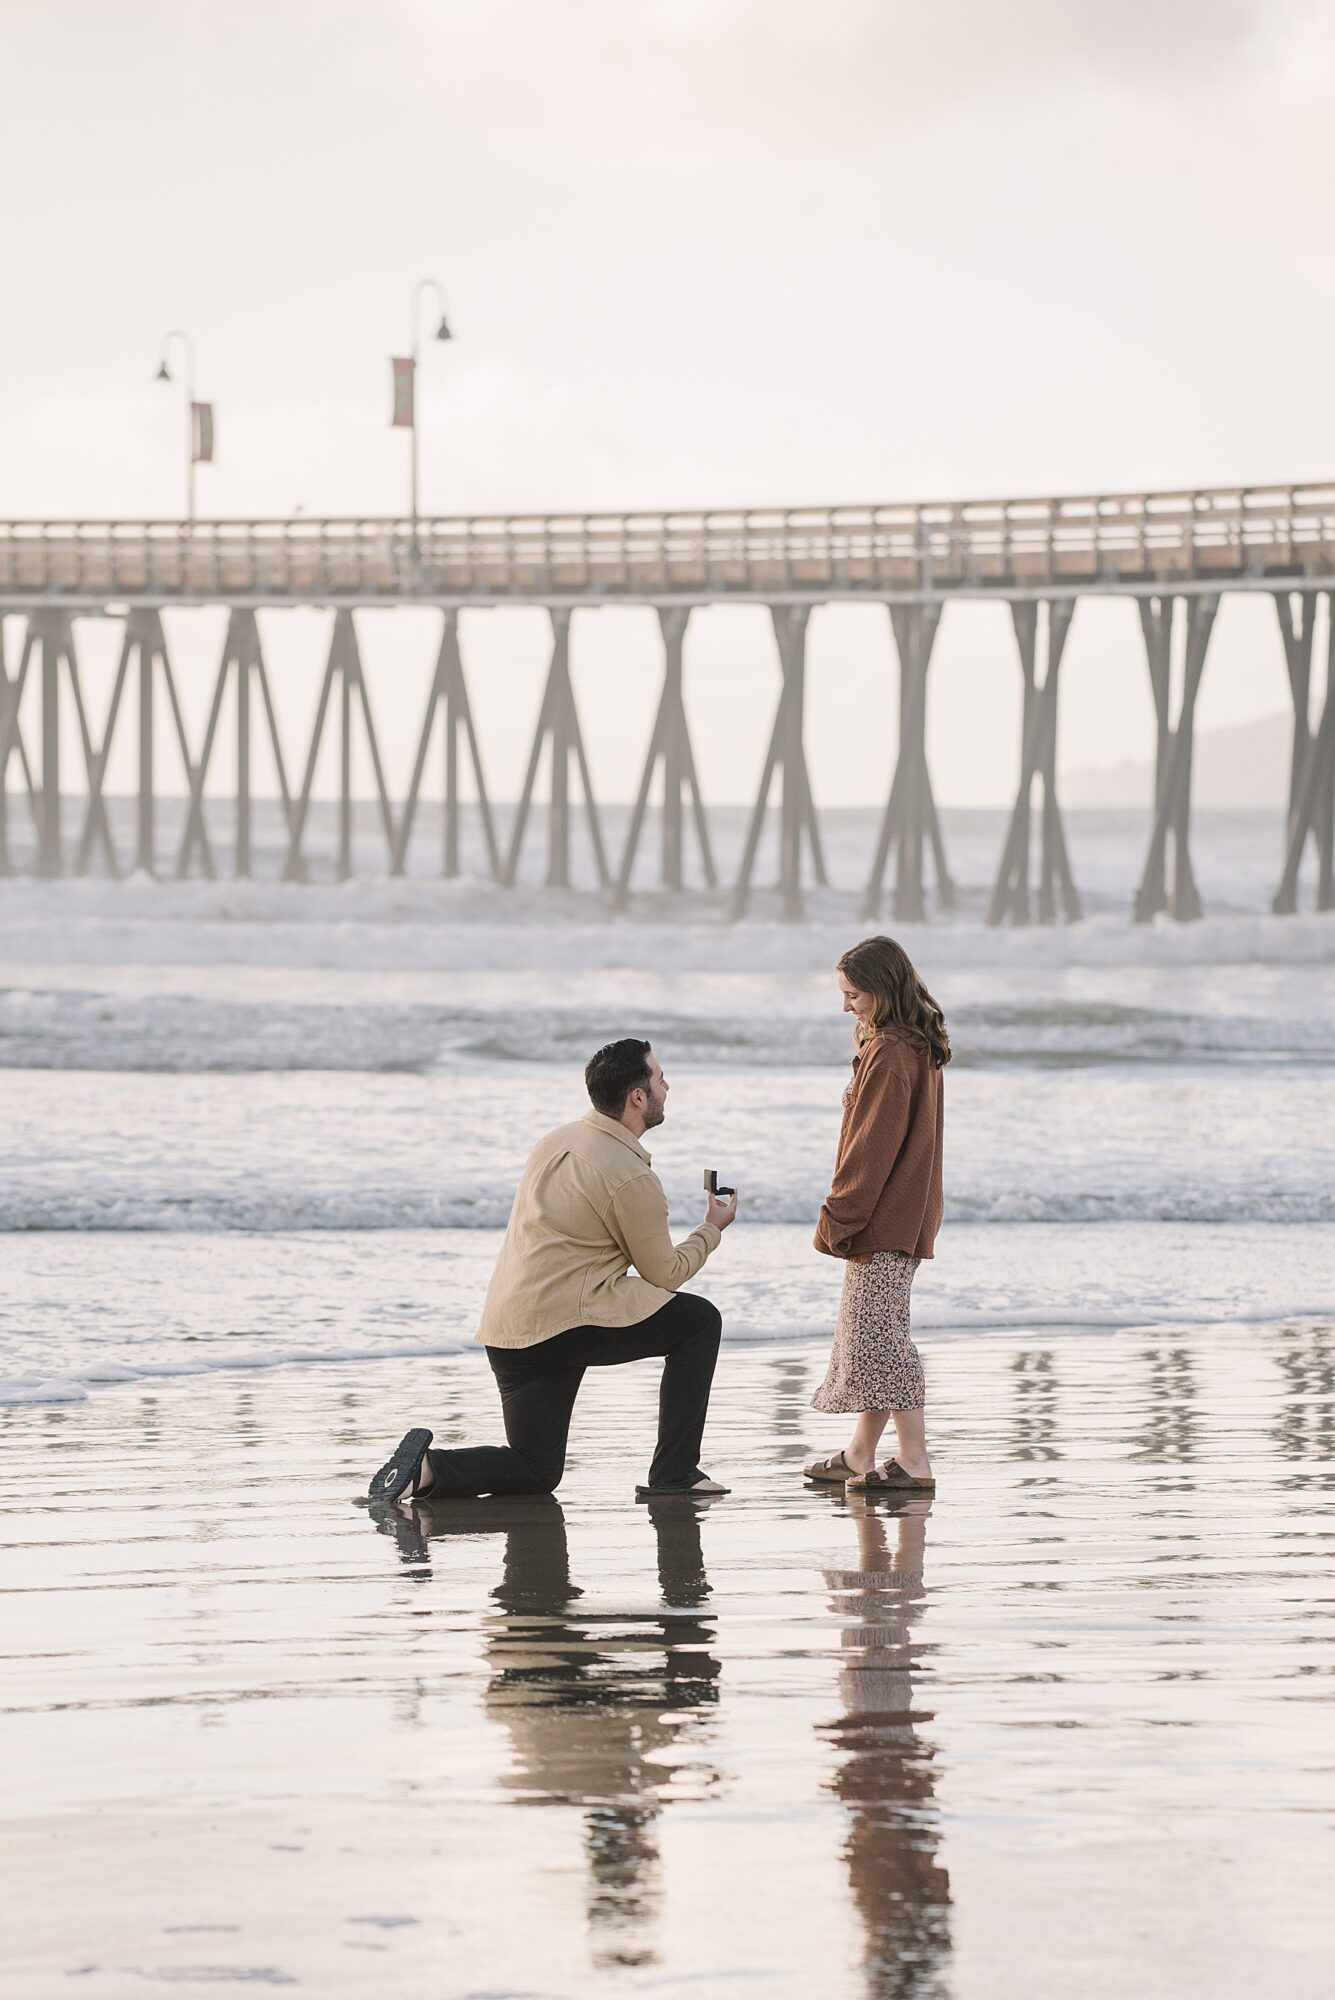 Man proposes to girlfriend on California Central Coast.